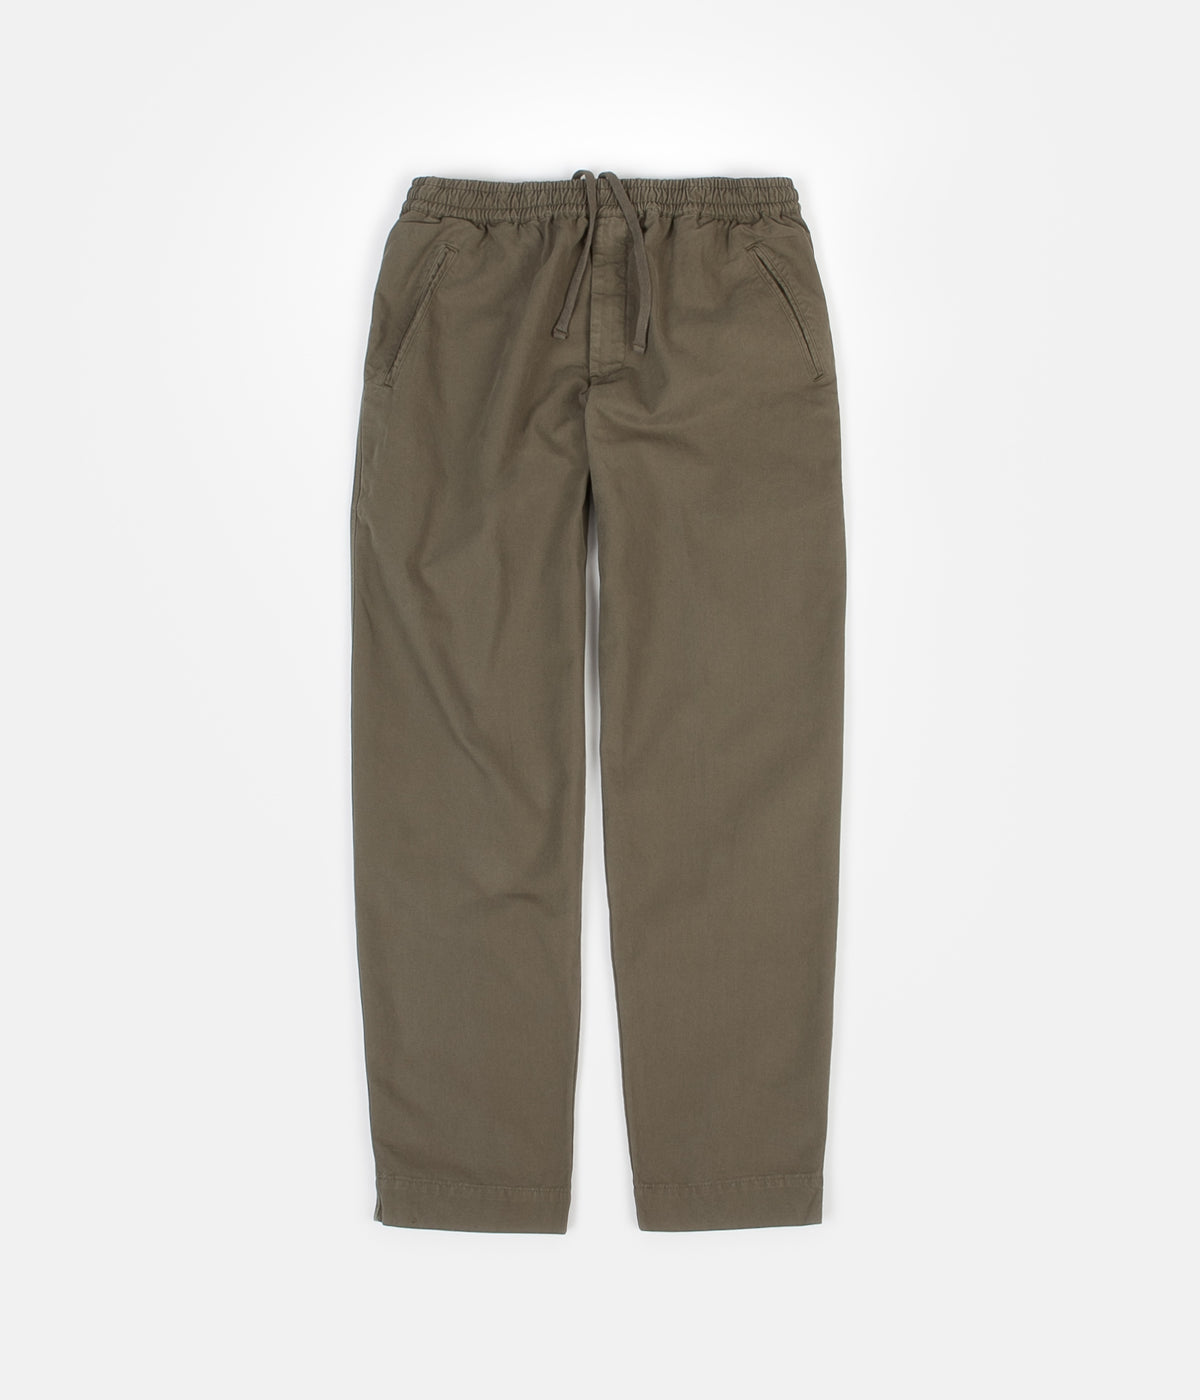 Rappson trousers